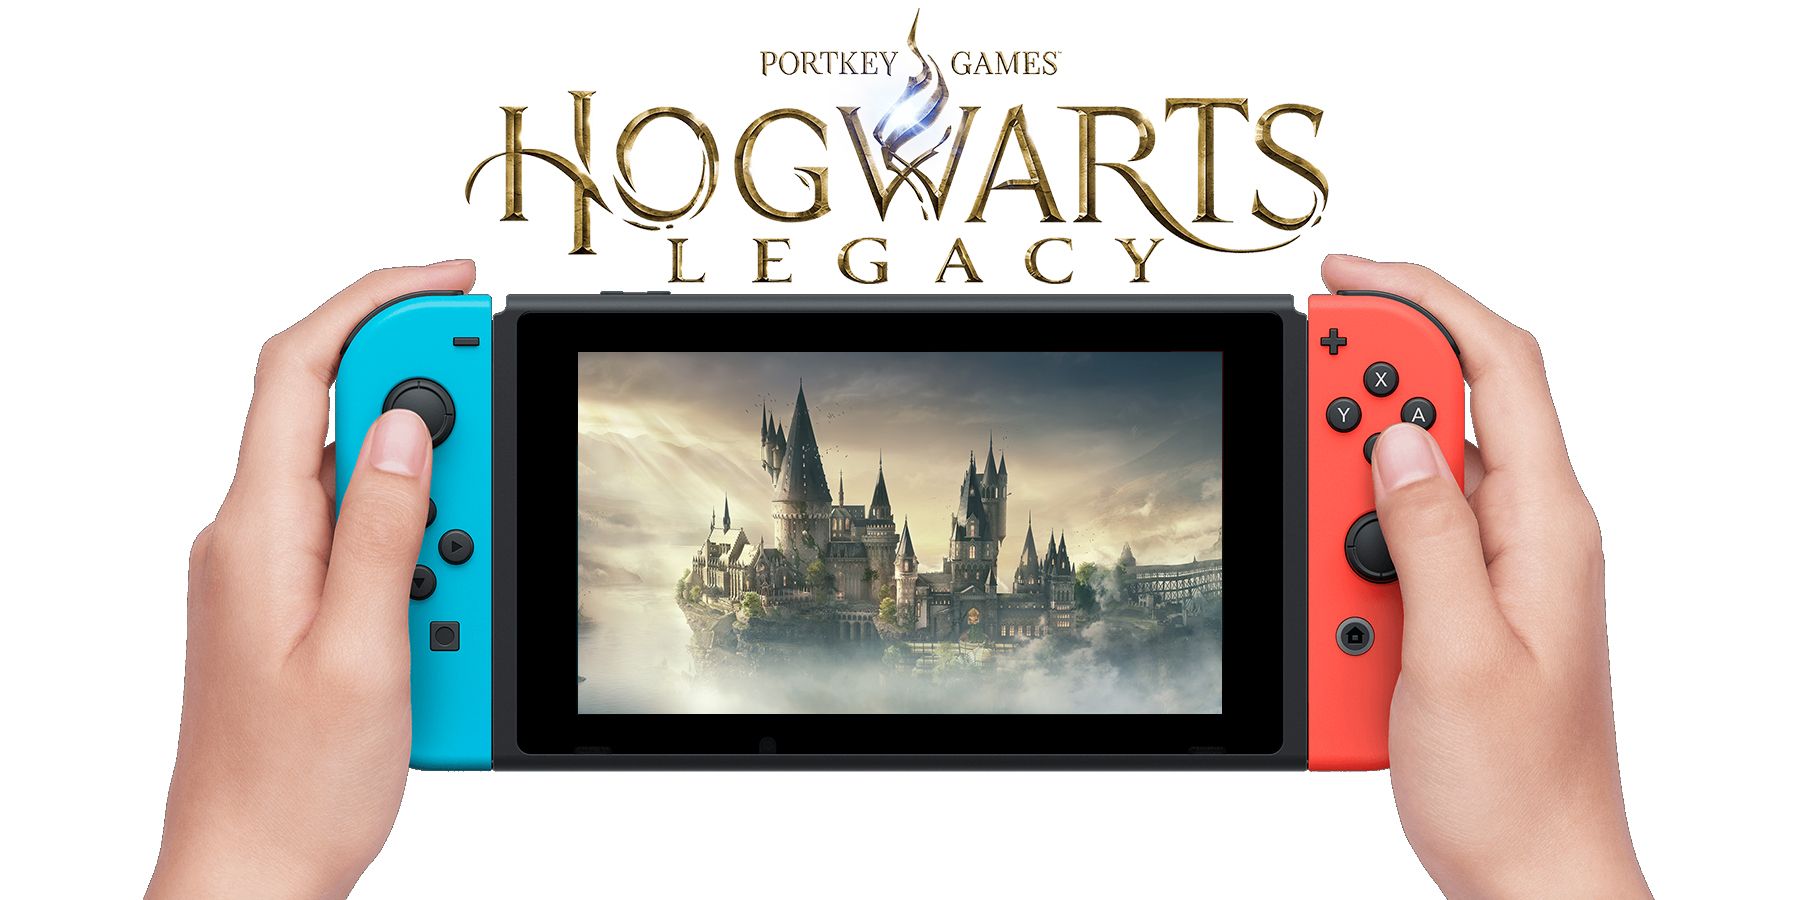 Hogwarts Legacy Switch: Nintendo version release date and how to